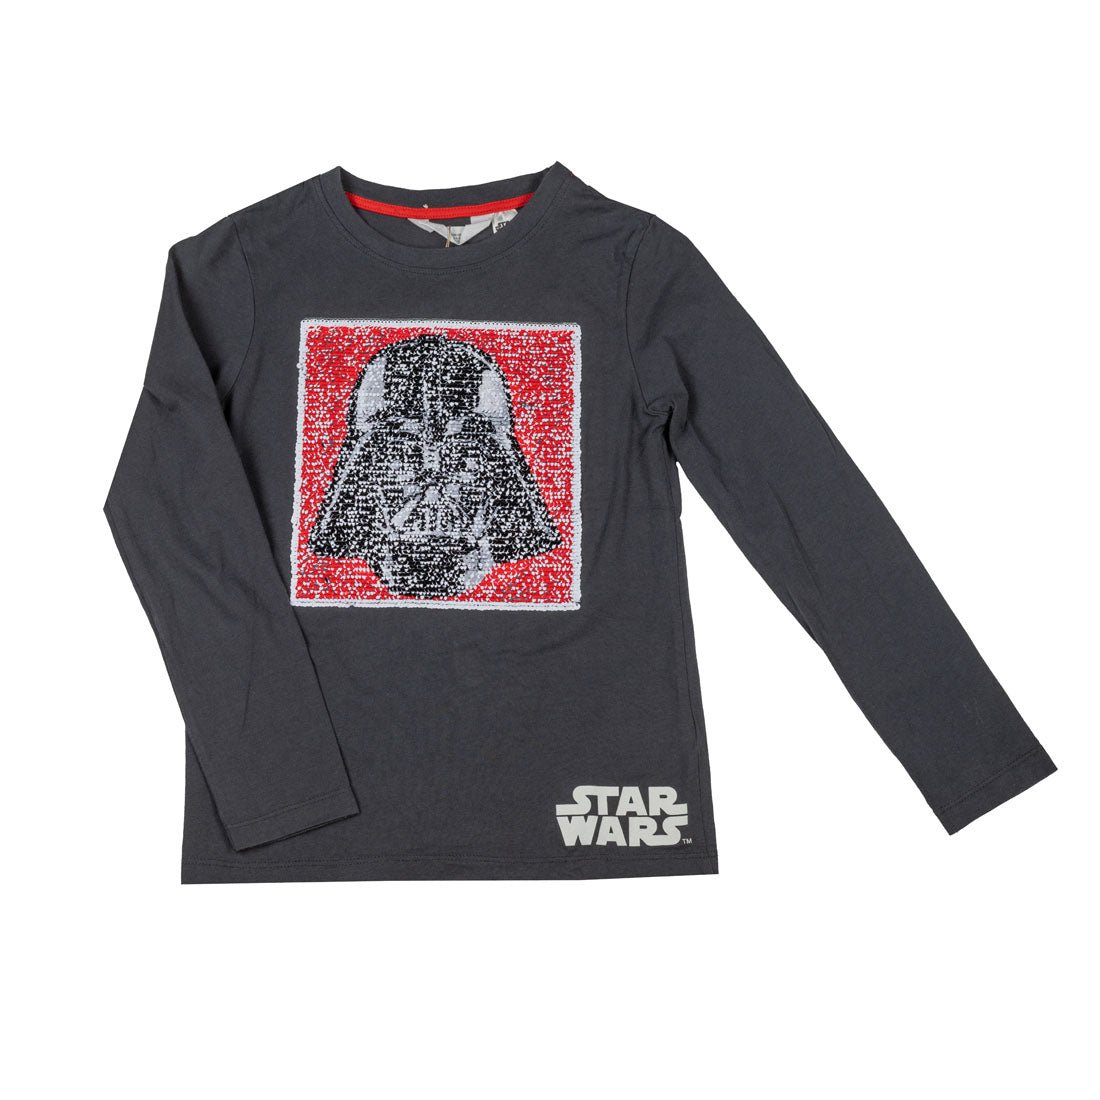 H&M Star Wars T Shirt For Boys - mymadstore.com